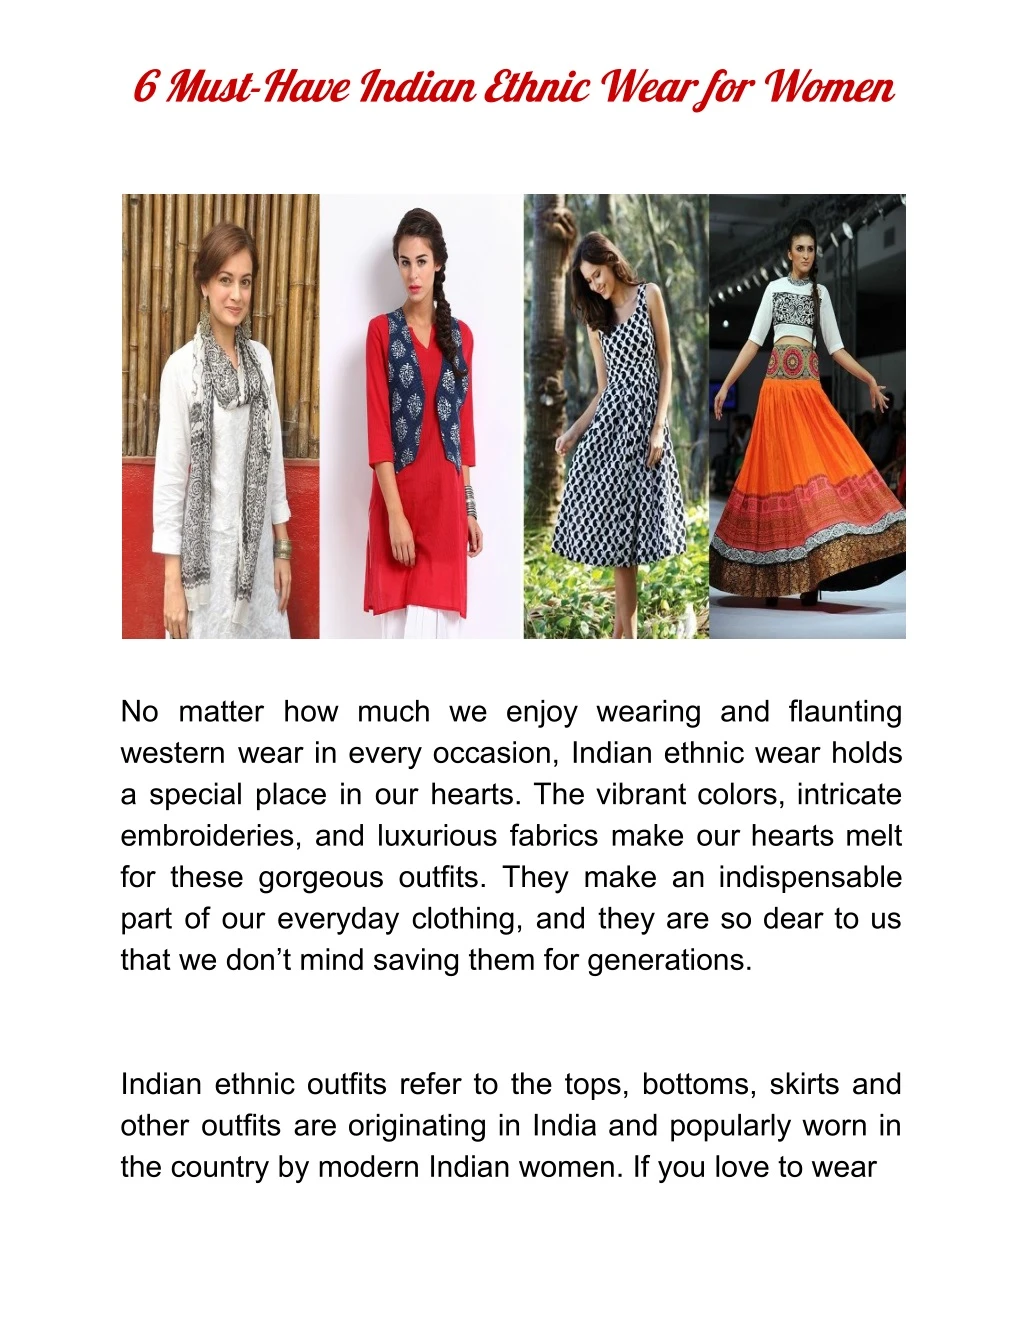 6 must have indian ethnic wear for women